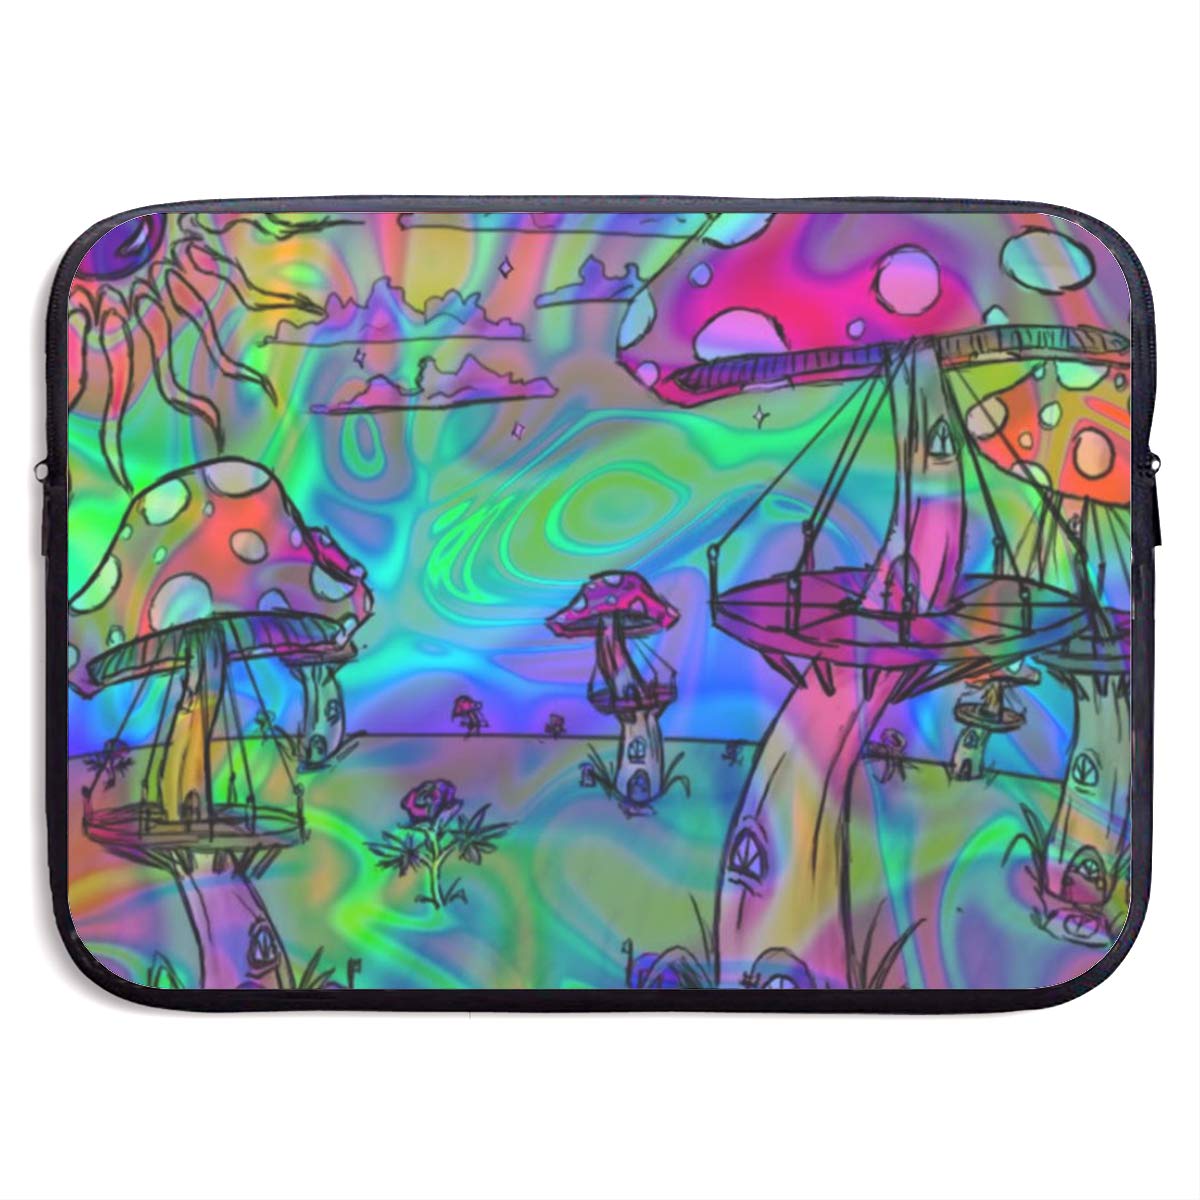 Liaanqianga Psychedelic Trippy Wallpaper 13-15 Inch - Psychedelic Drugs - HD Wallpaper 